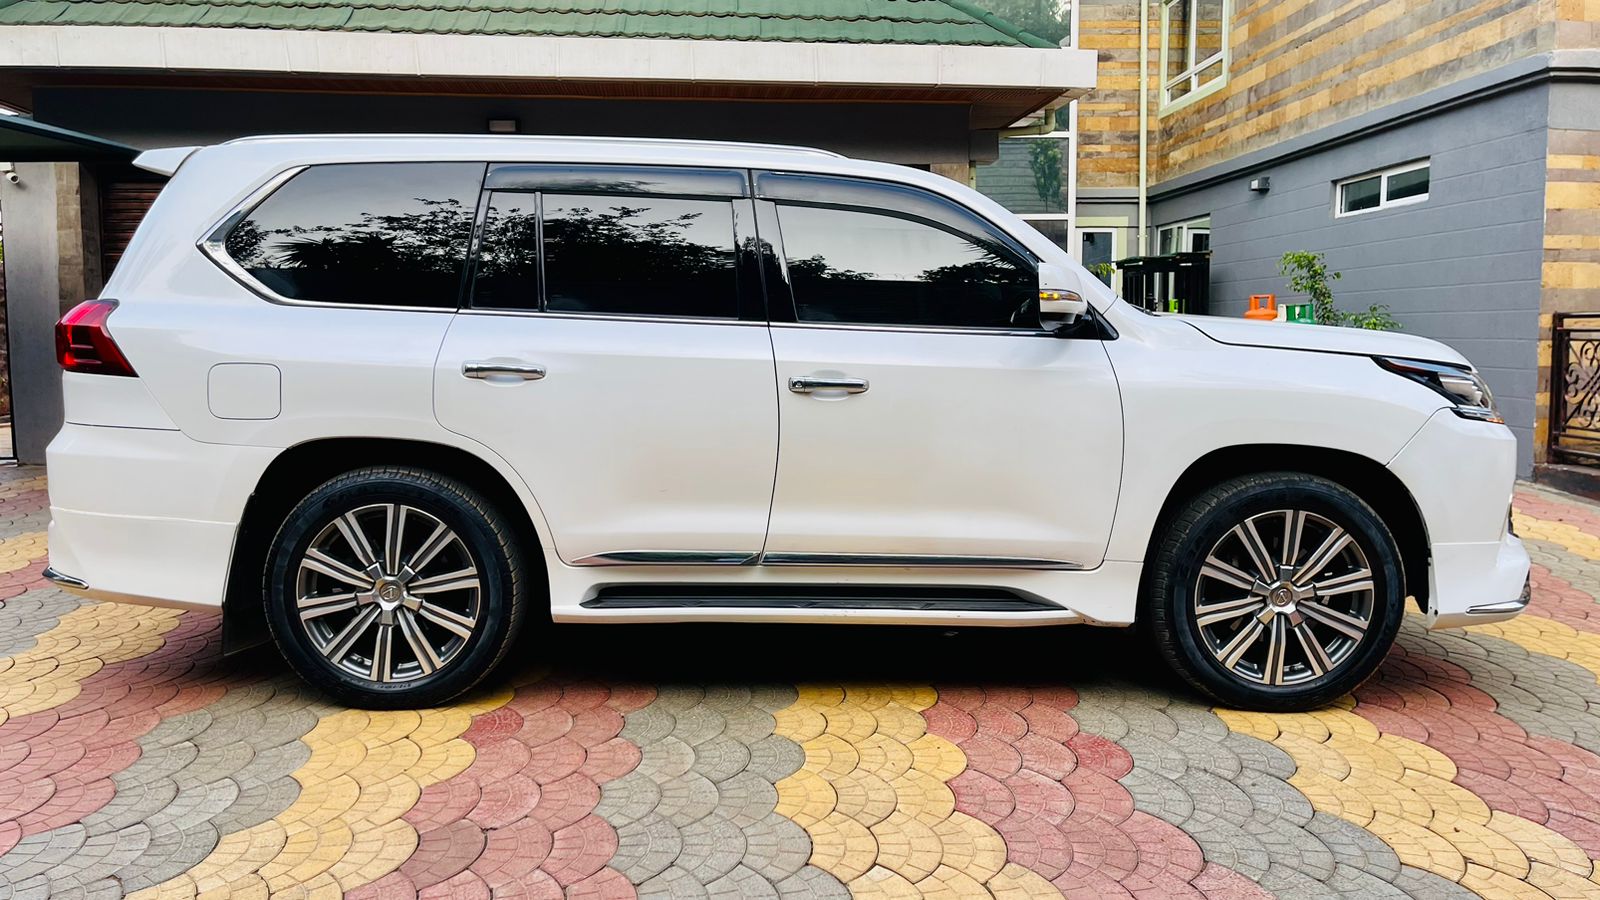 Cars Cars For Sale/Vehicles-LEXUS LX 570 2016 Fully Loaded JUST ARRIVED EXCLUSIVE For SALE in Kenya 21